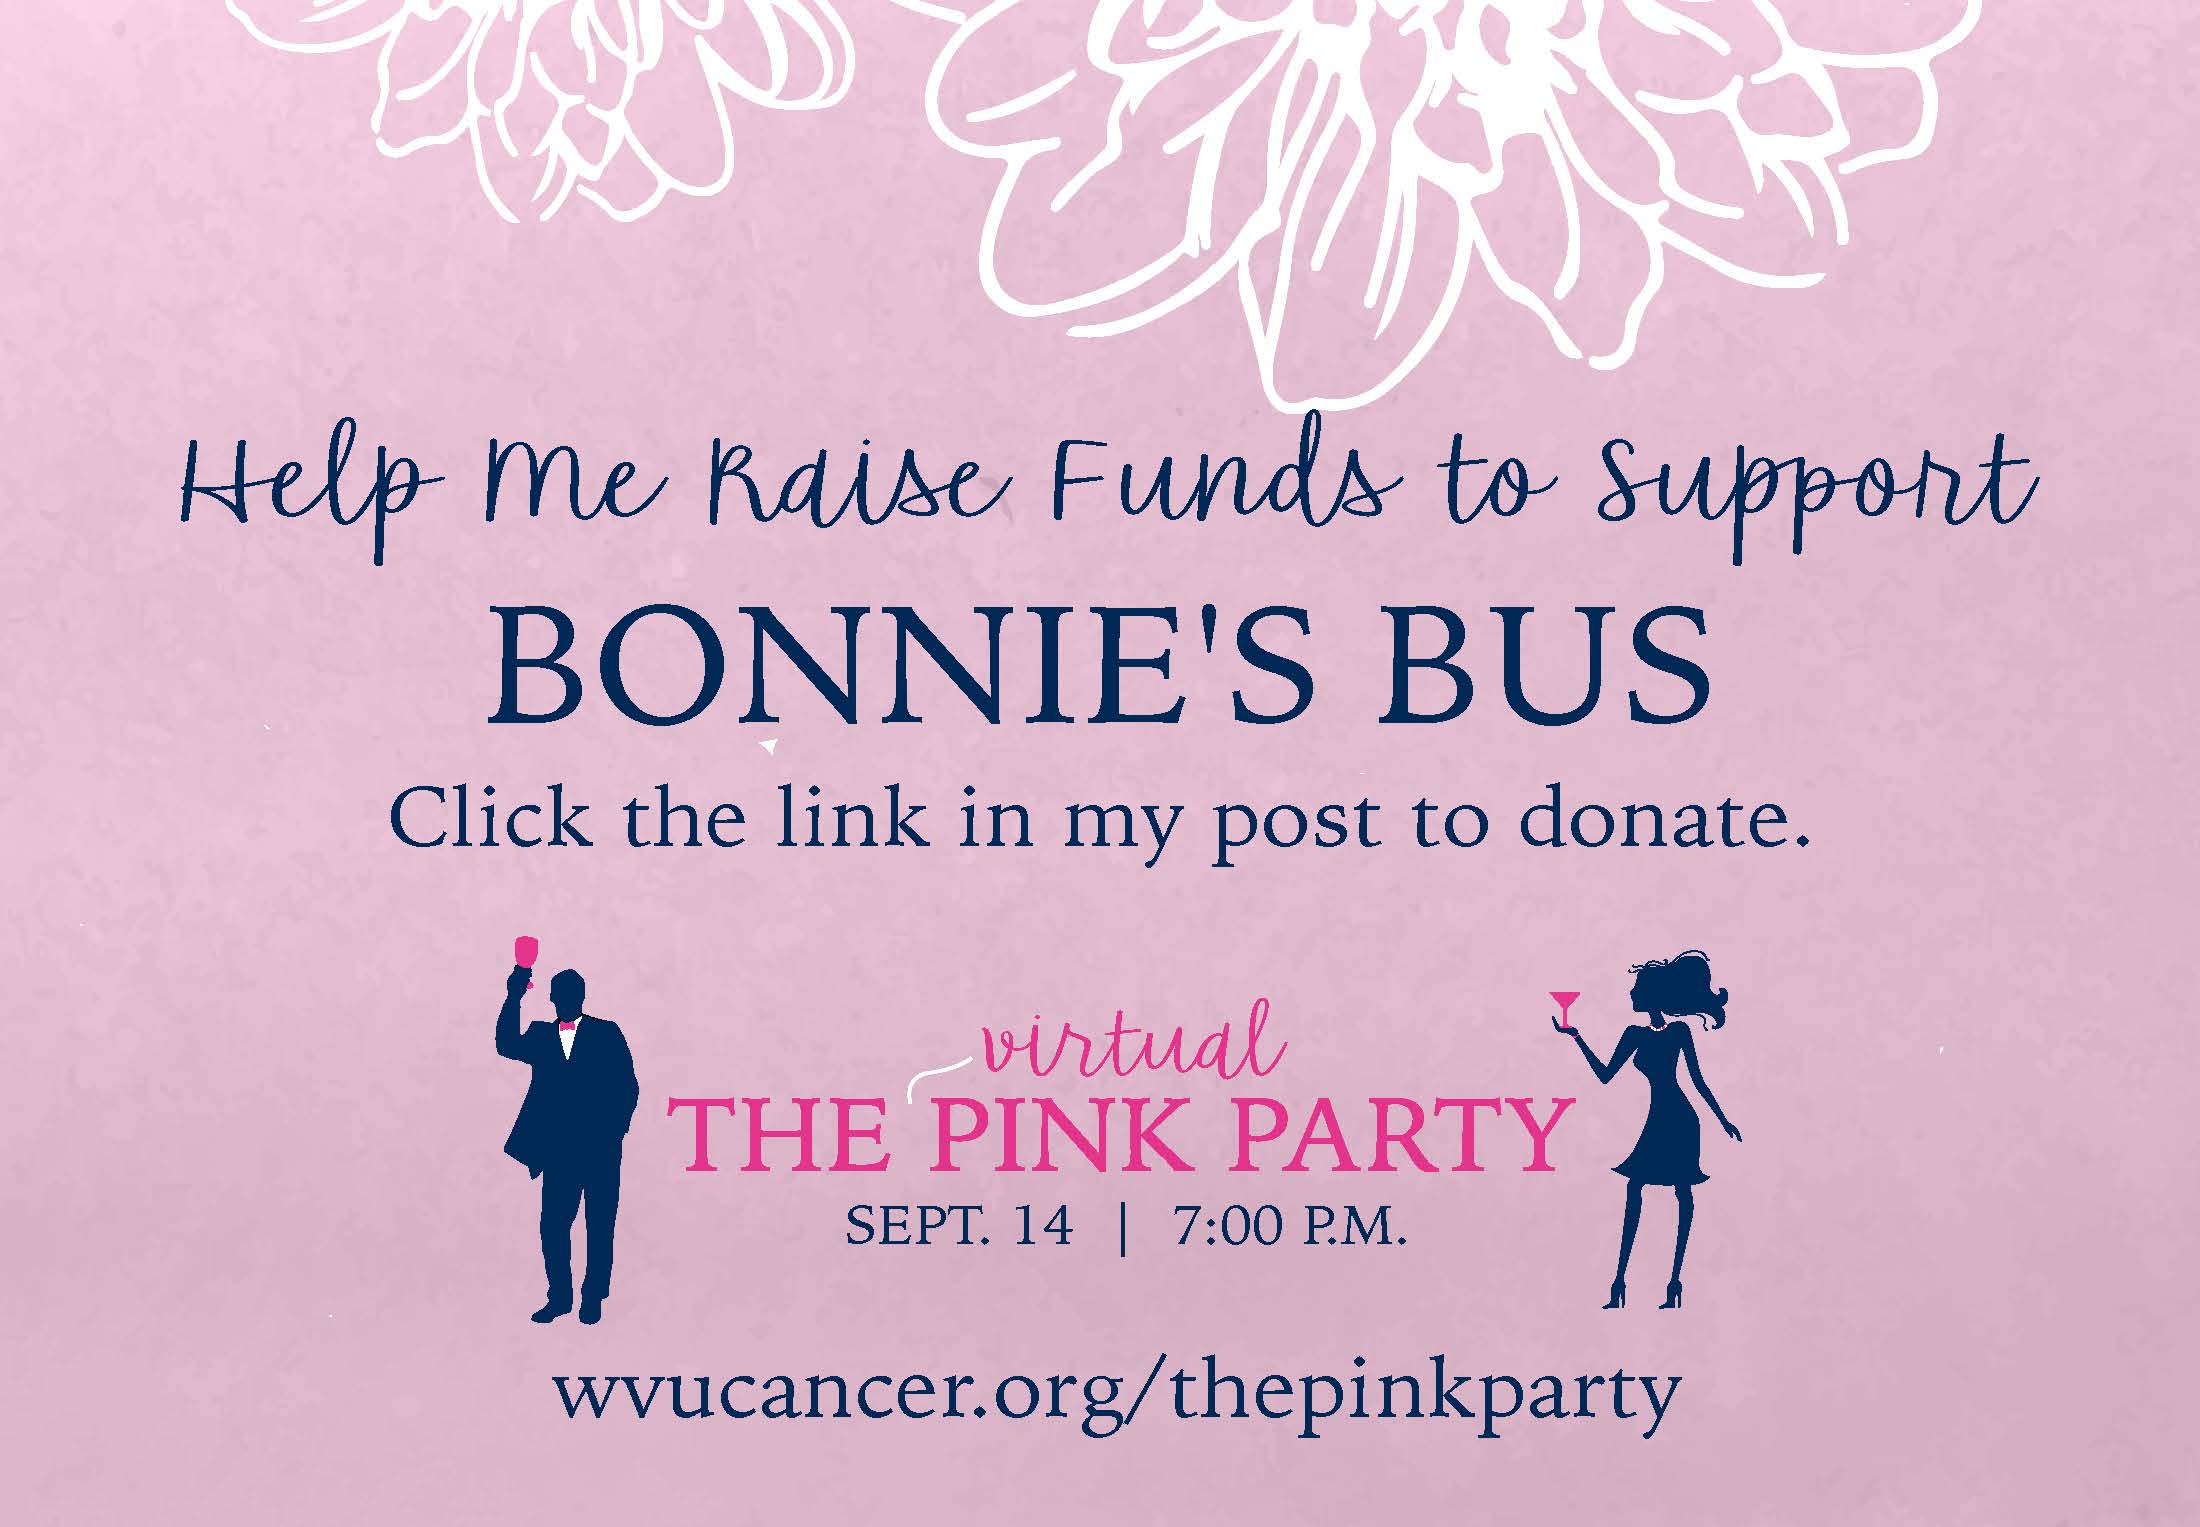 The Virtual Pink Party, Sept. 14, 2020.